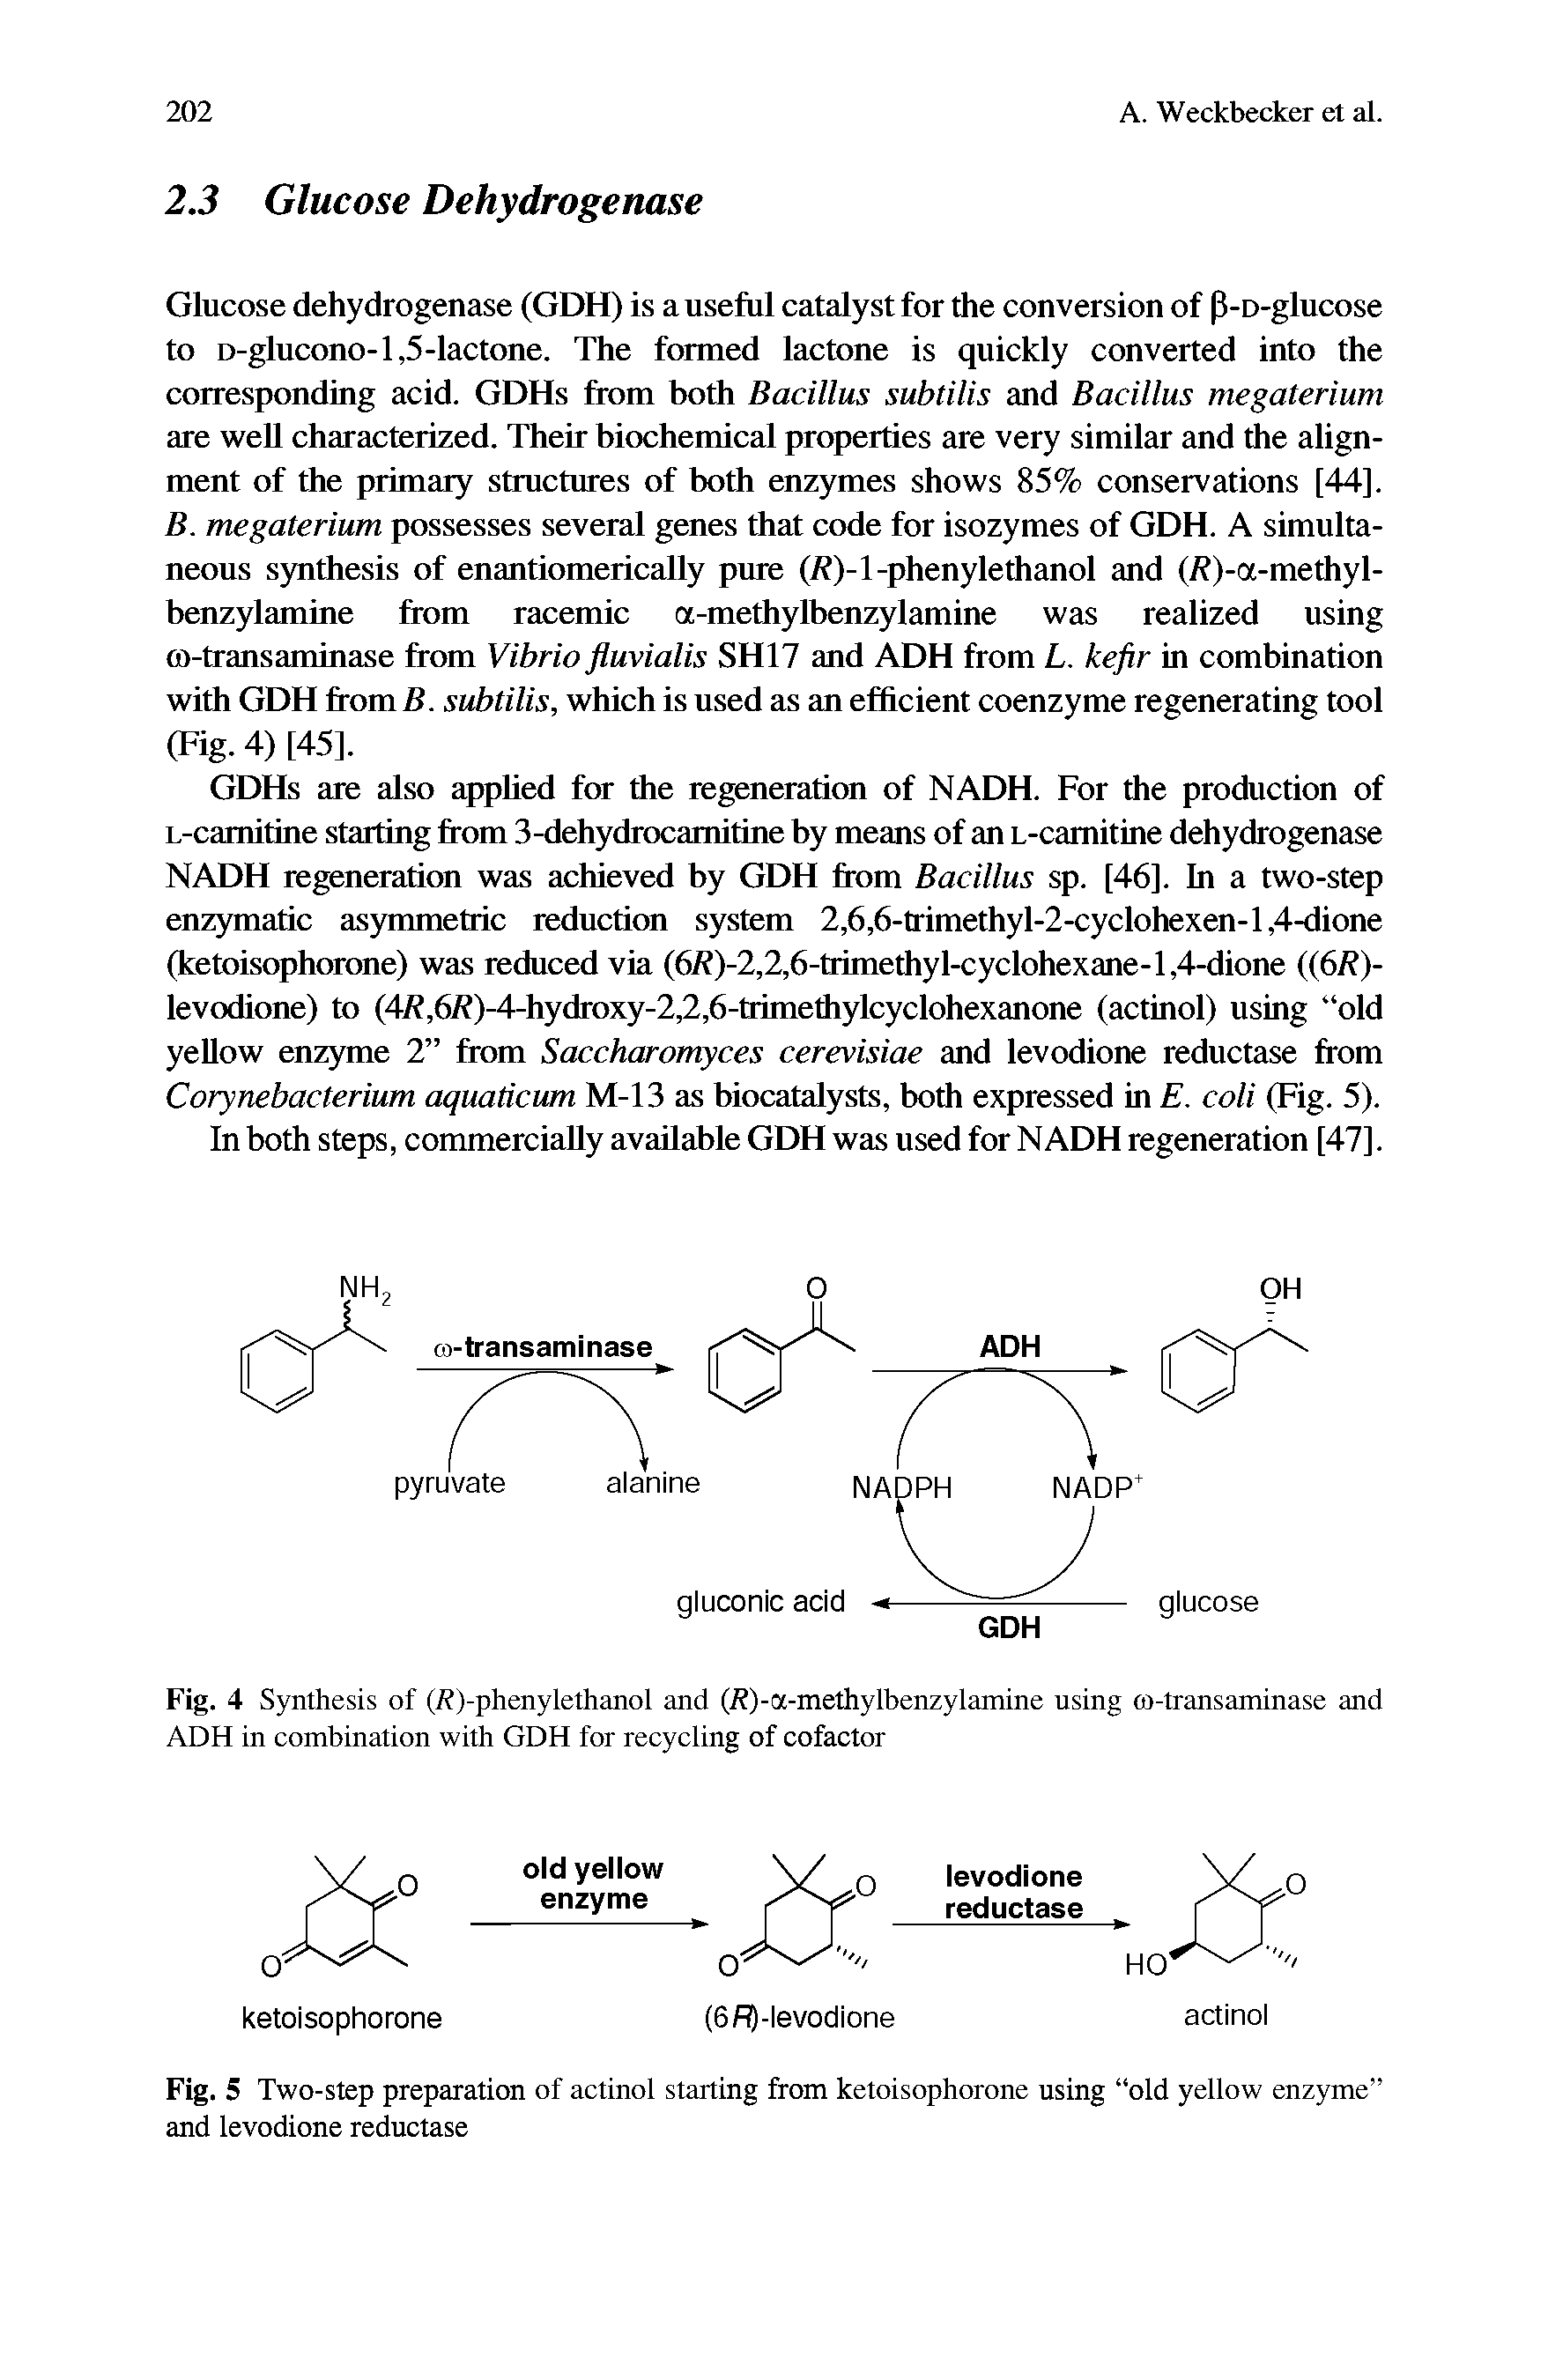 Fig. 5 Two-step preparation of actinol starting from ketoisophorone using old yellow enzyme and levodione reductase...